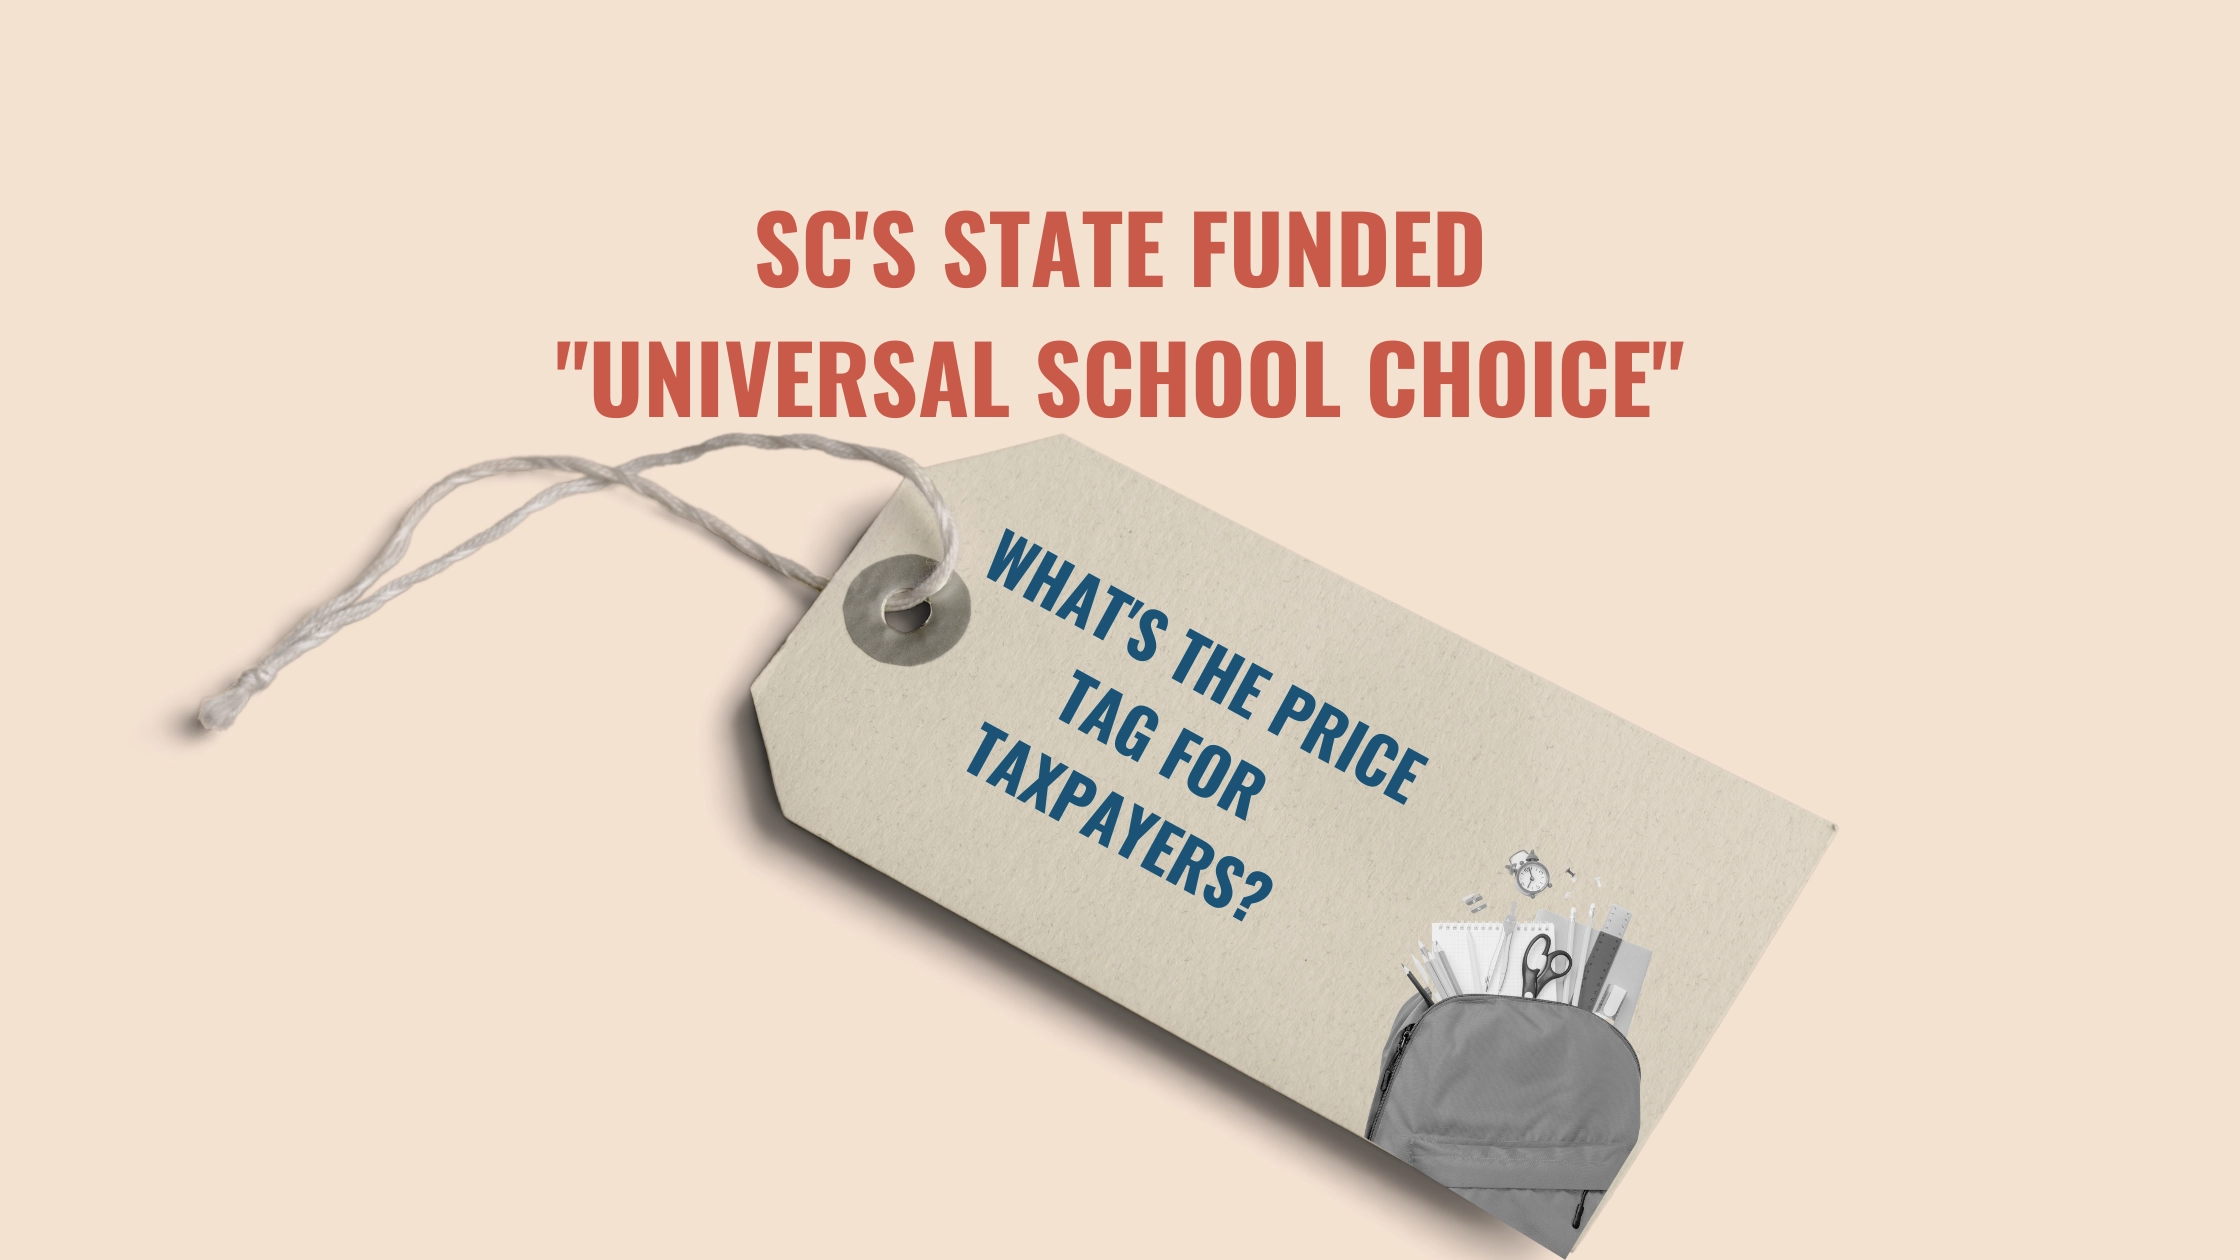 SC's State Funded "Univeral School Choice": What's the Price Tag for Taxpayers?